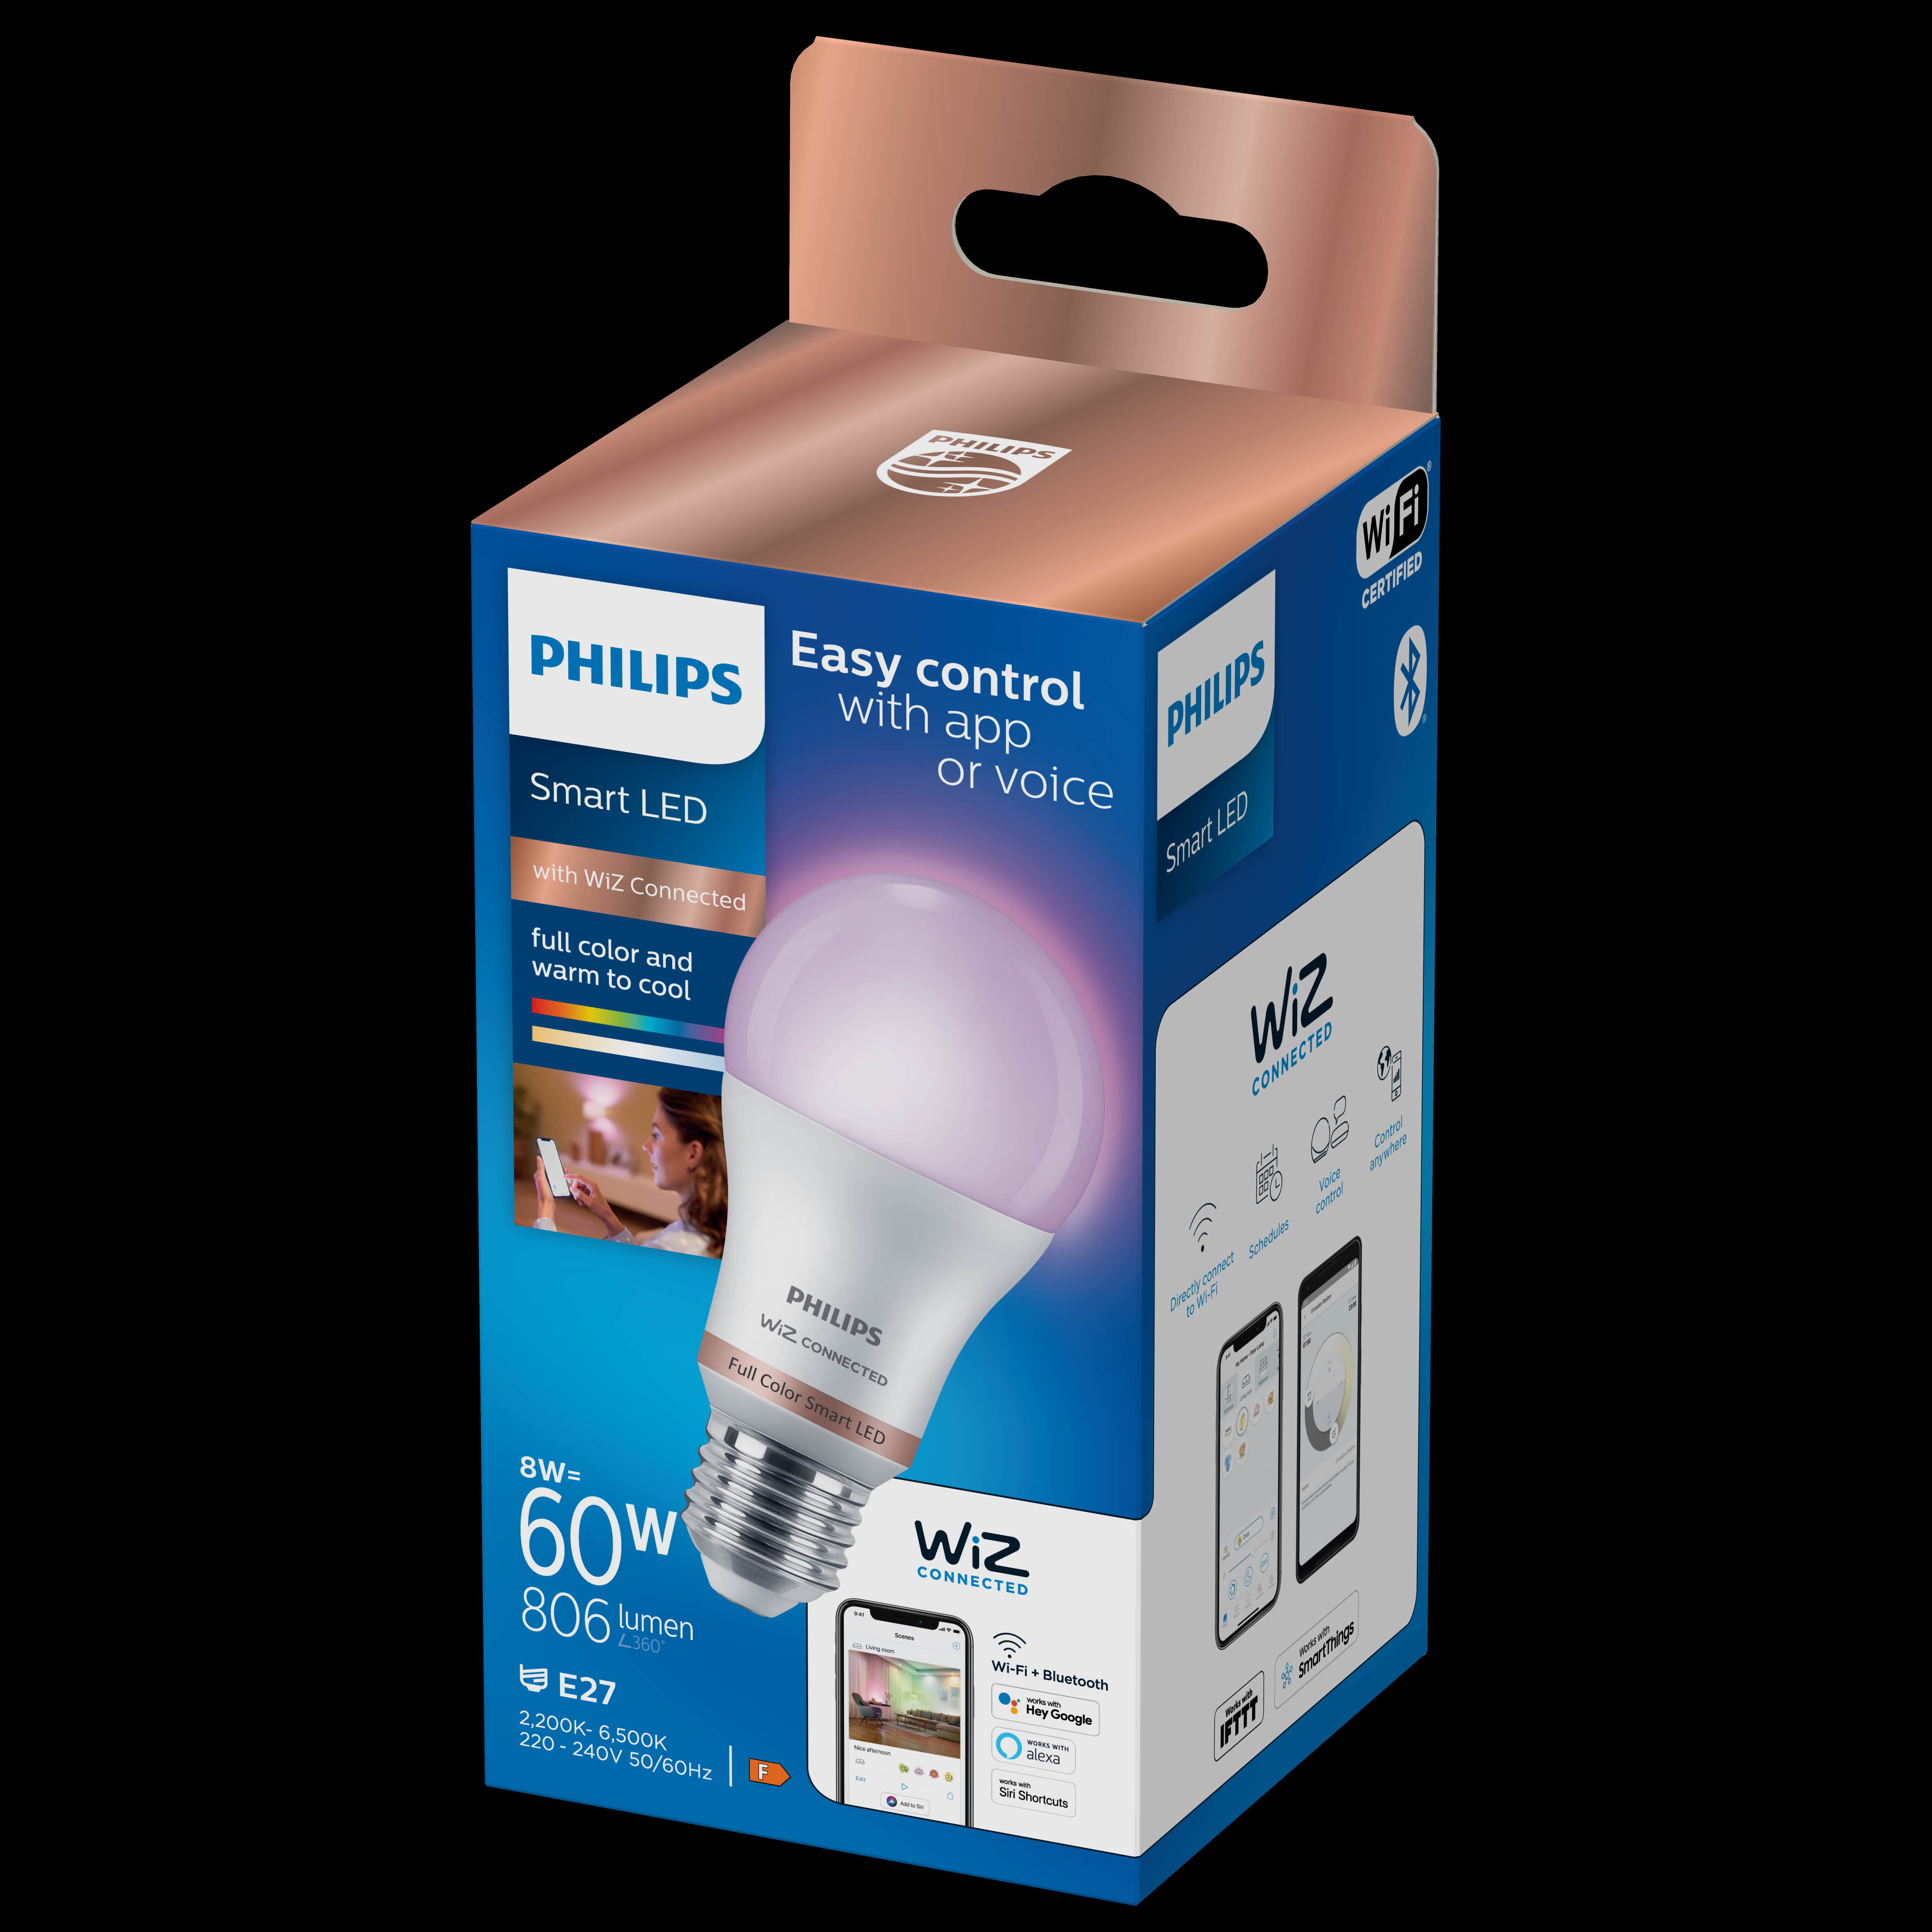 PHILIPS Smart LED E27, WiZ connected, 8 W, 806 lm, Full color, dimmbar